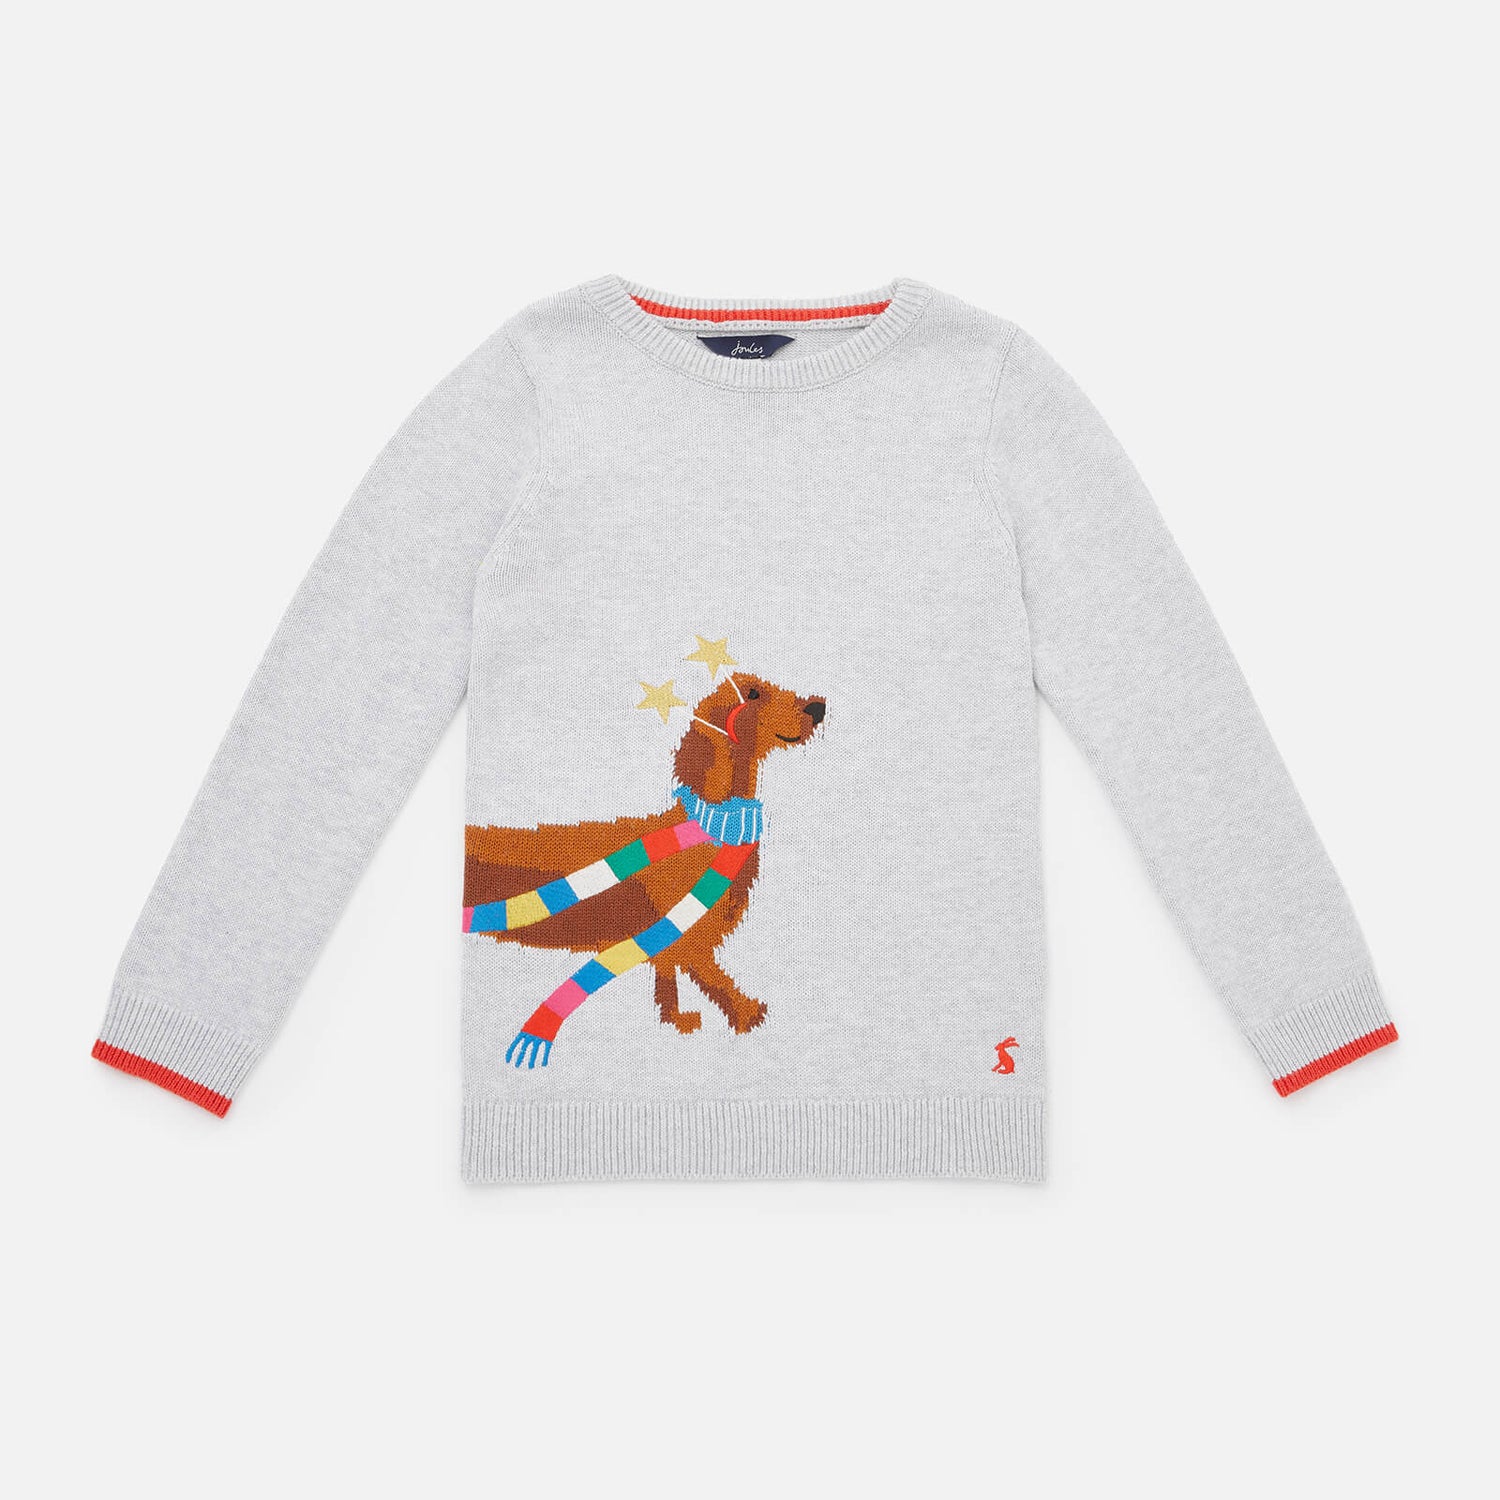 Joules Kids' Festive Cracking Dog Cotton Jumper - 3 Years